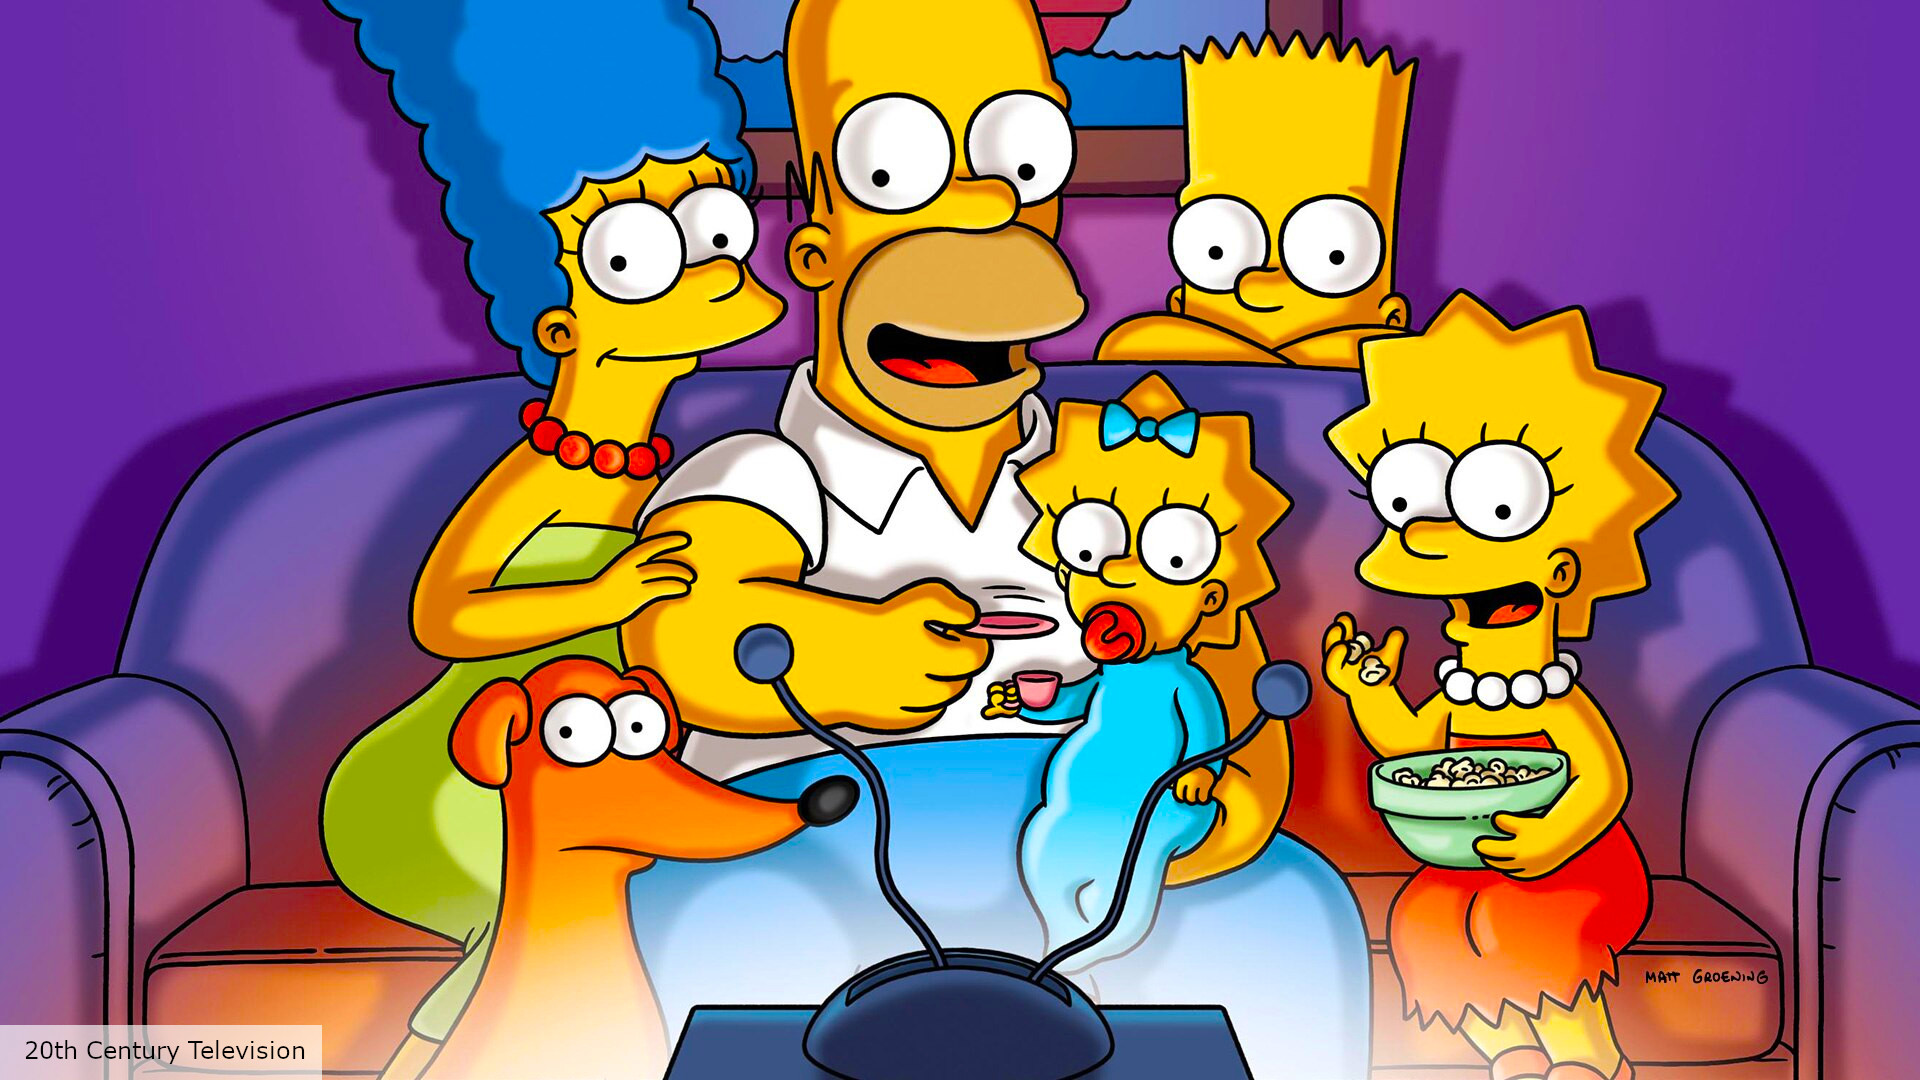 New Simpsons Clip Reveals Anime Lisa Simpson in Death Note Parody By  Original Studio - IGN